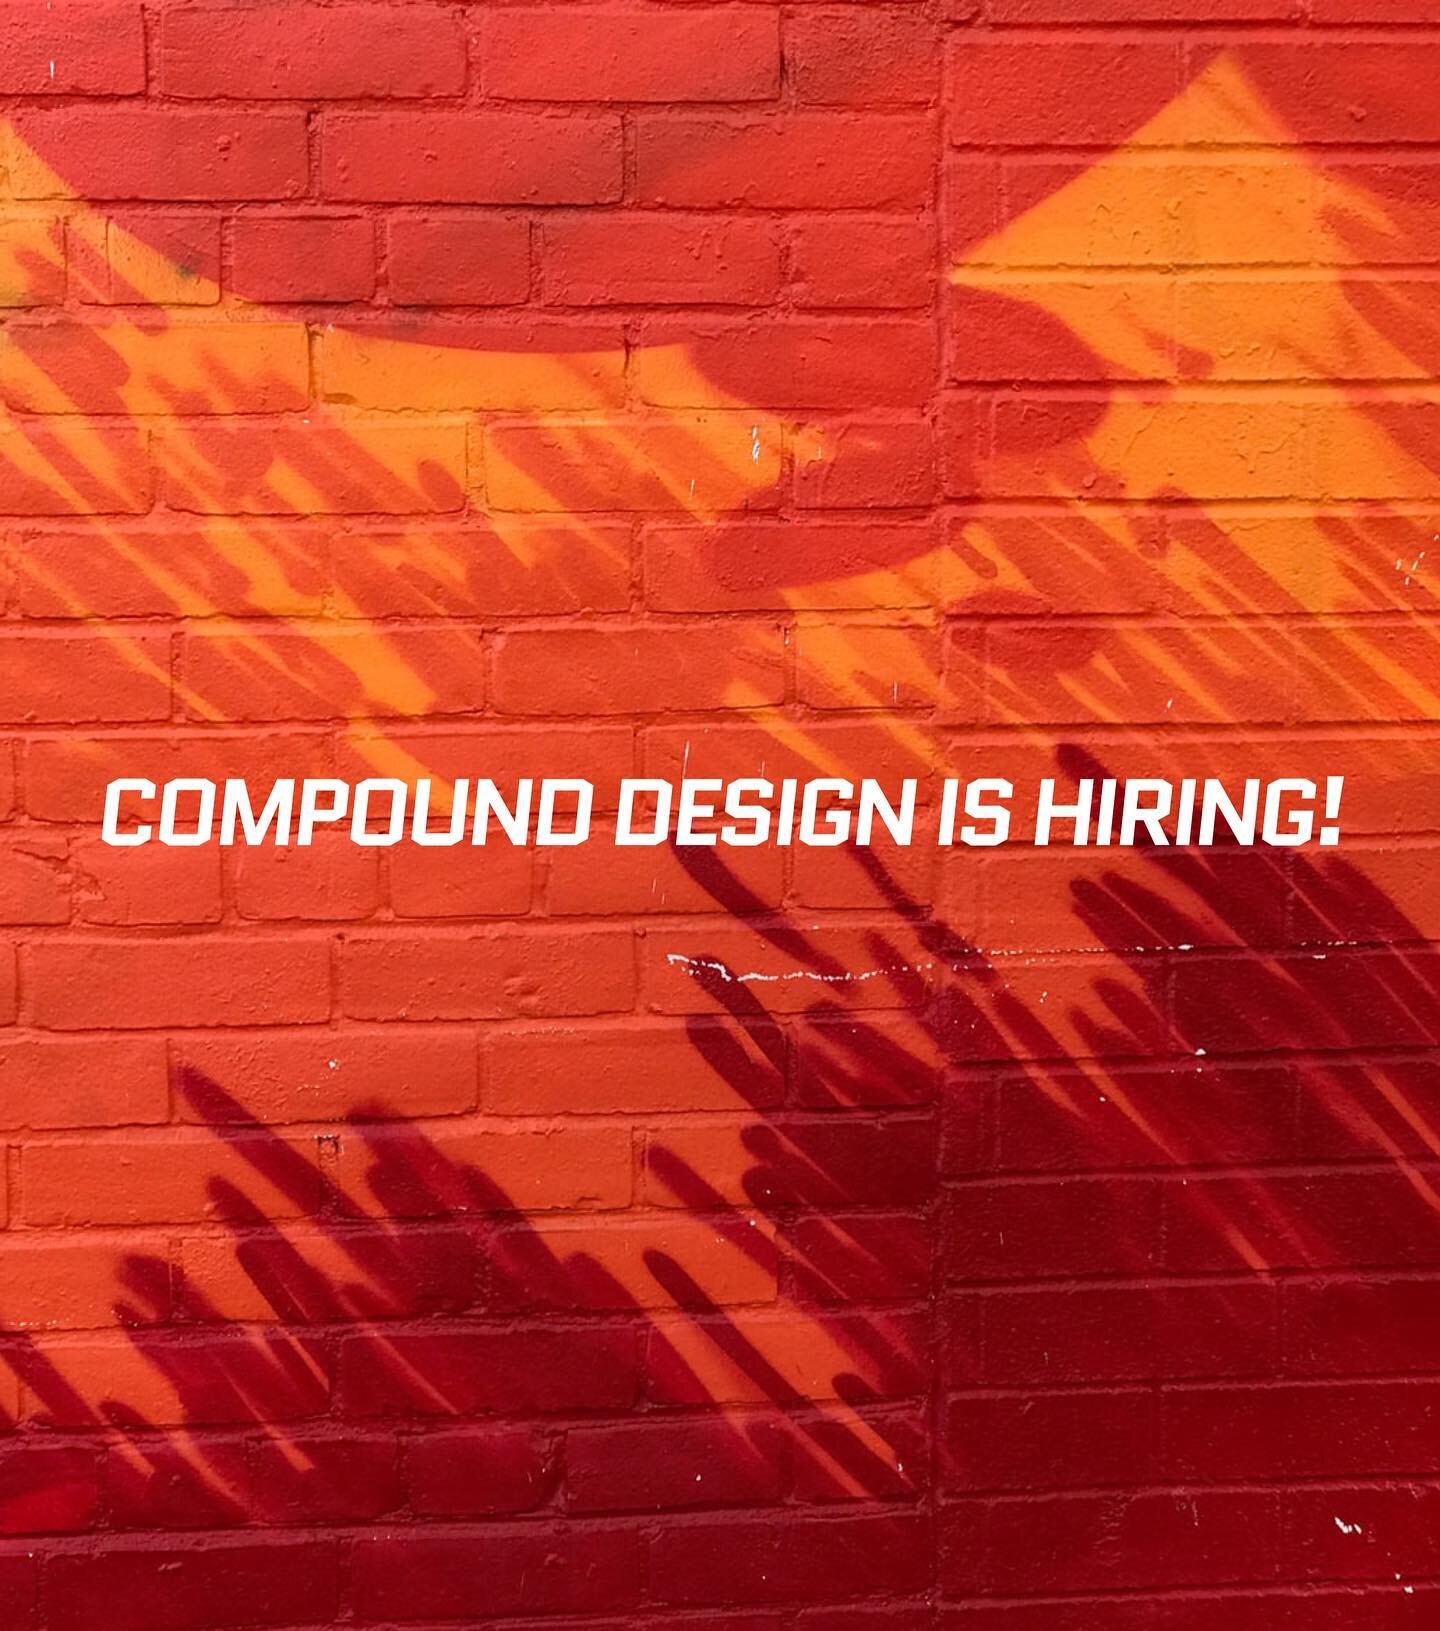 Compound Design is a dynamic custom millwork, furniture and architectural paneling company and we&rsquo;re looking for our next full-time teammate. 

Our ideal candidate should have an exceptional attention to detail &mdash; our work is sharp because